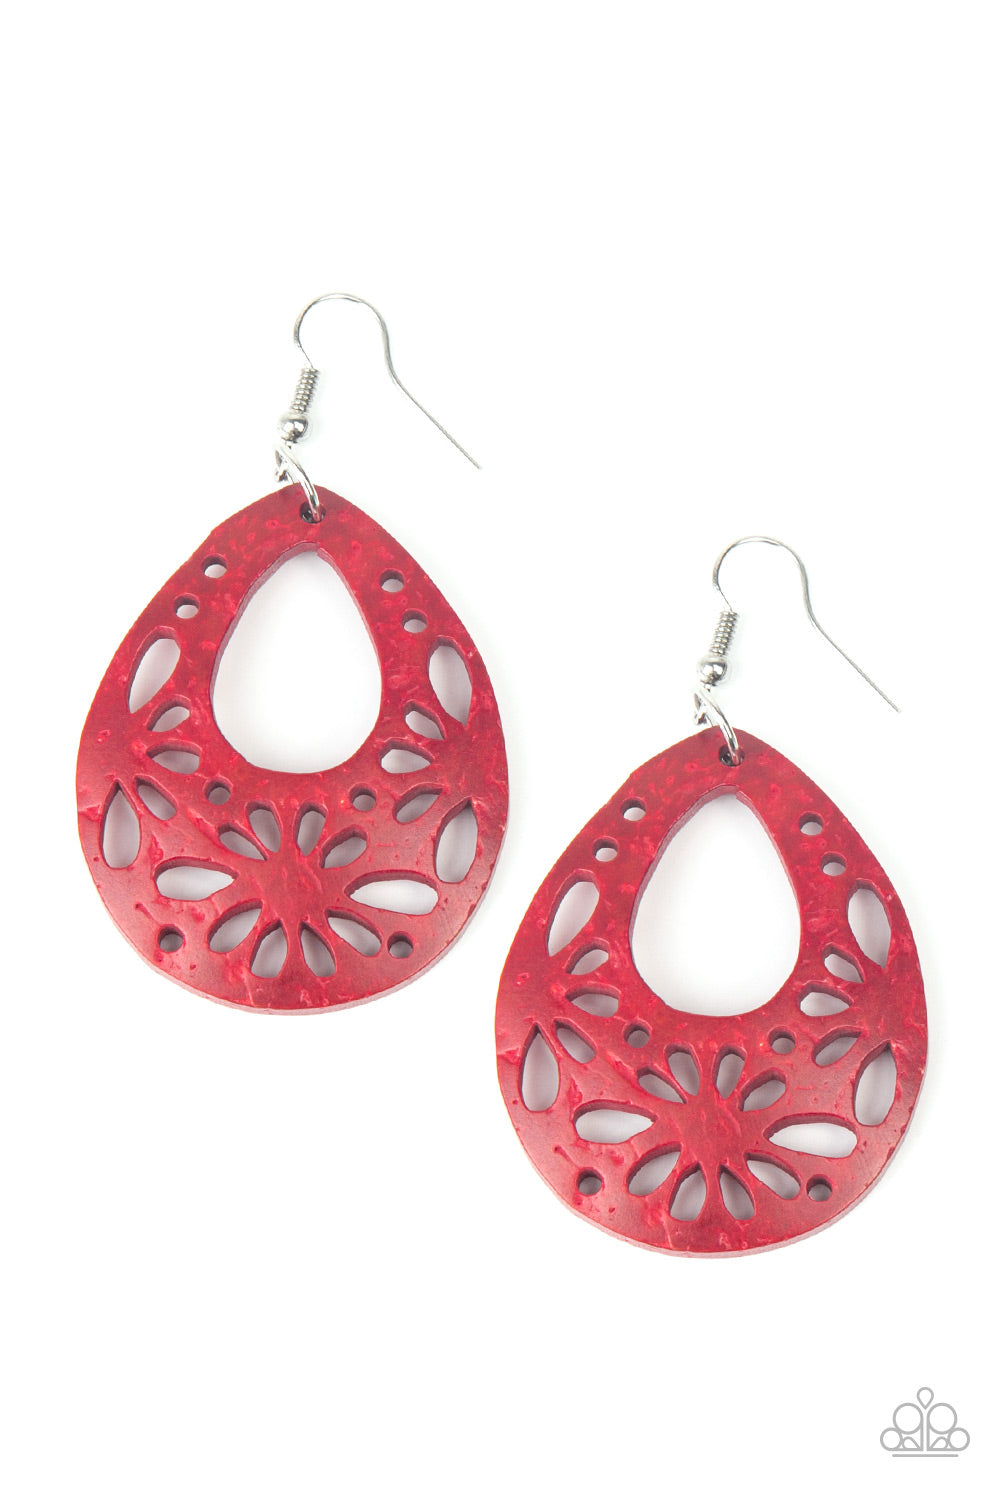 Paparazzi Accessories Merrilly Marooned - Red Wood Earrings - Lady T Accessories